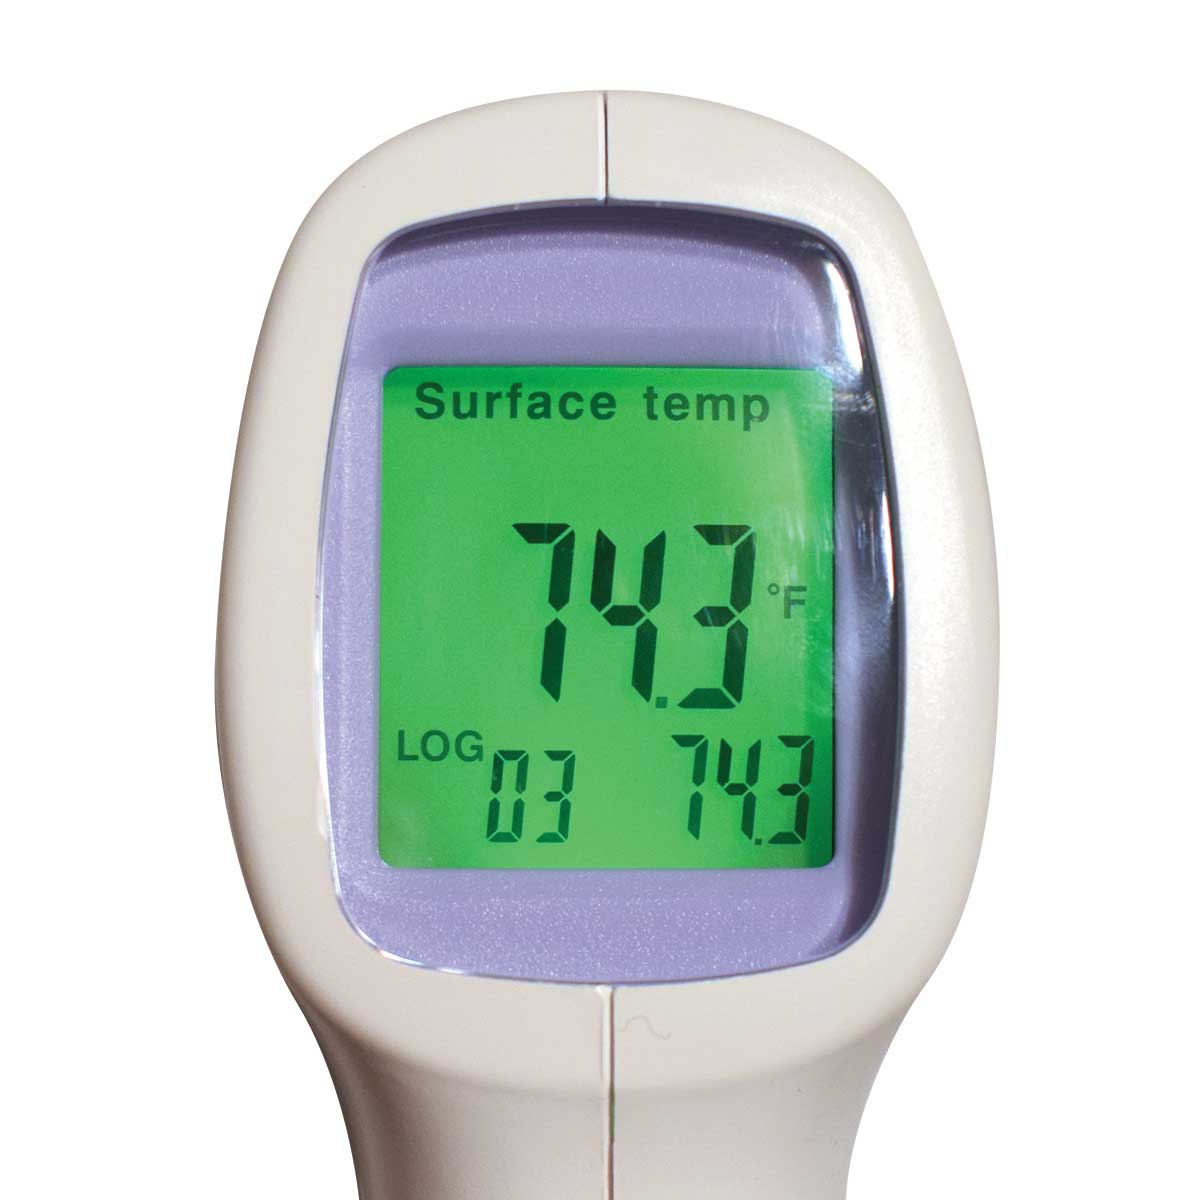 https://plumgroveinc.com/wp-content/uploads/surface-temperature-infrared-thermometer-1200x1200-1.jpg